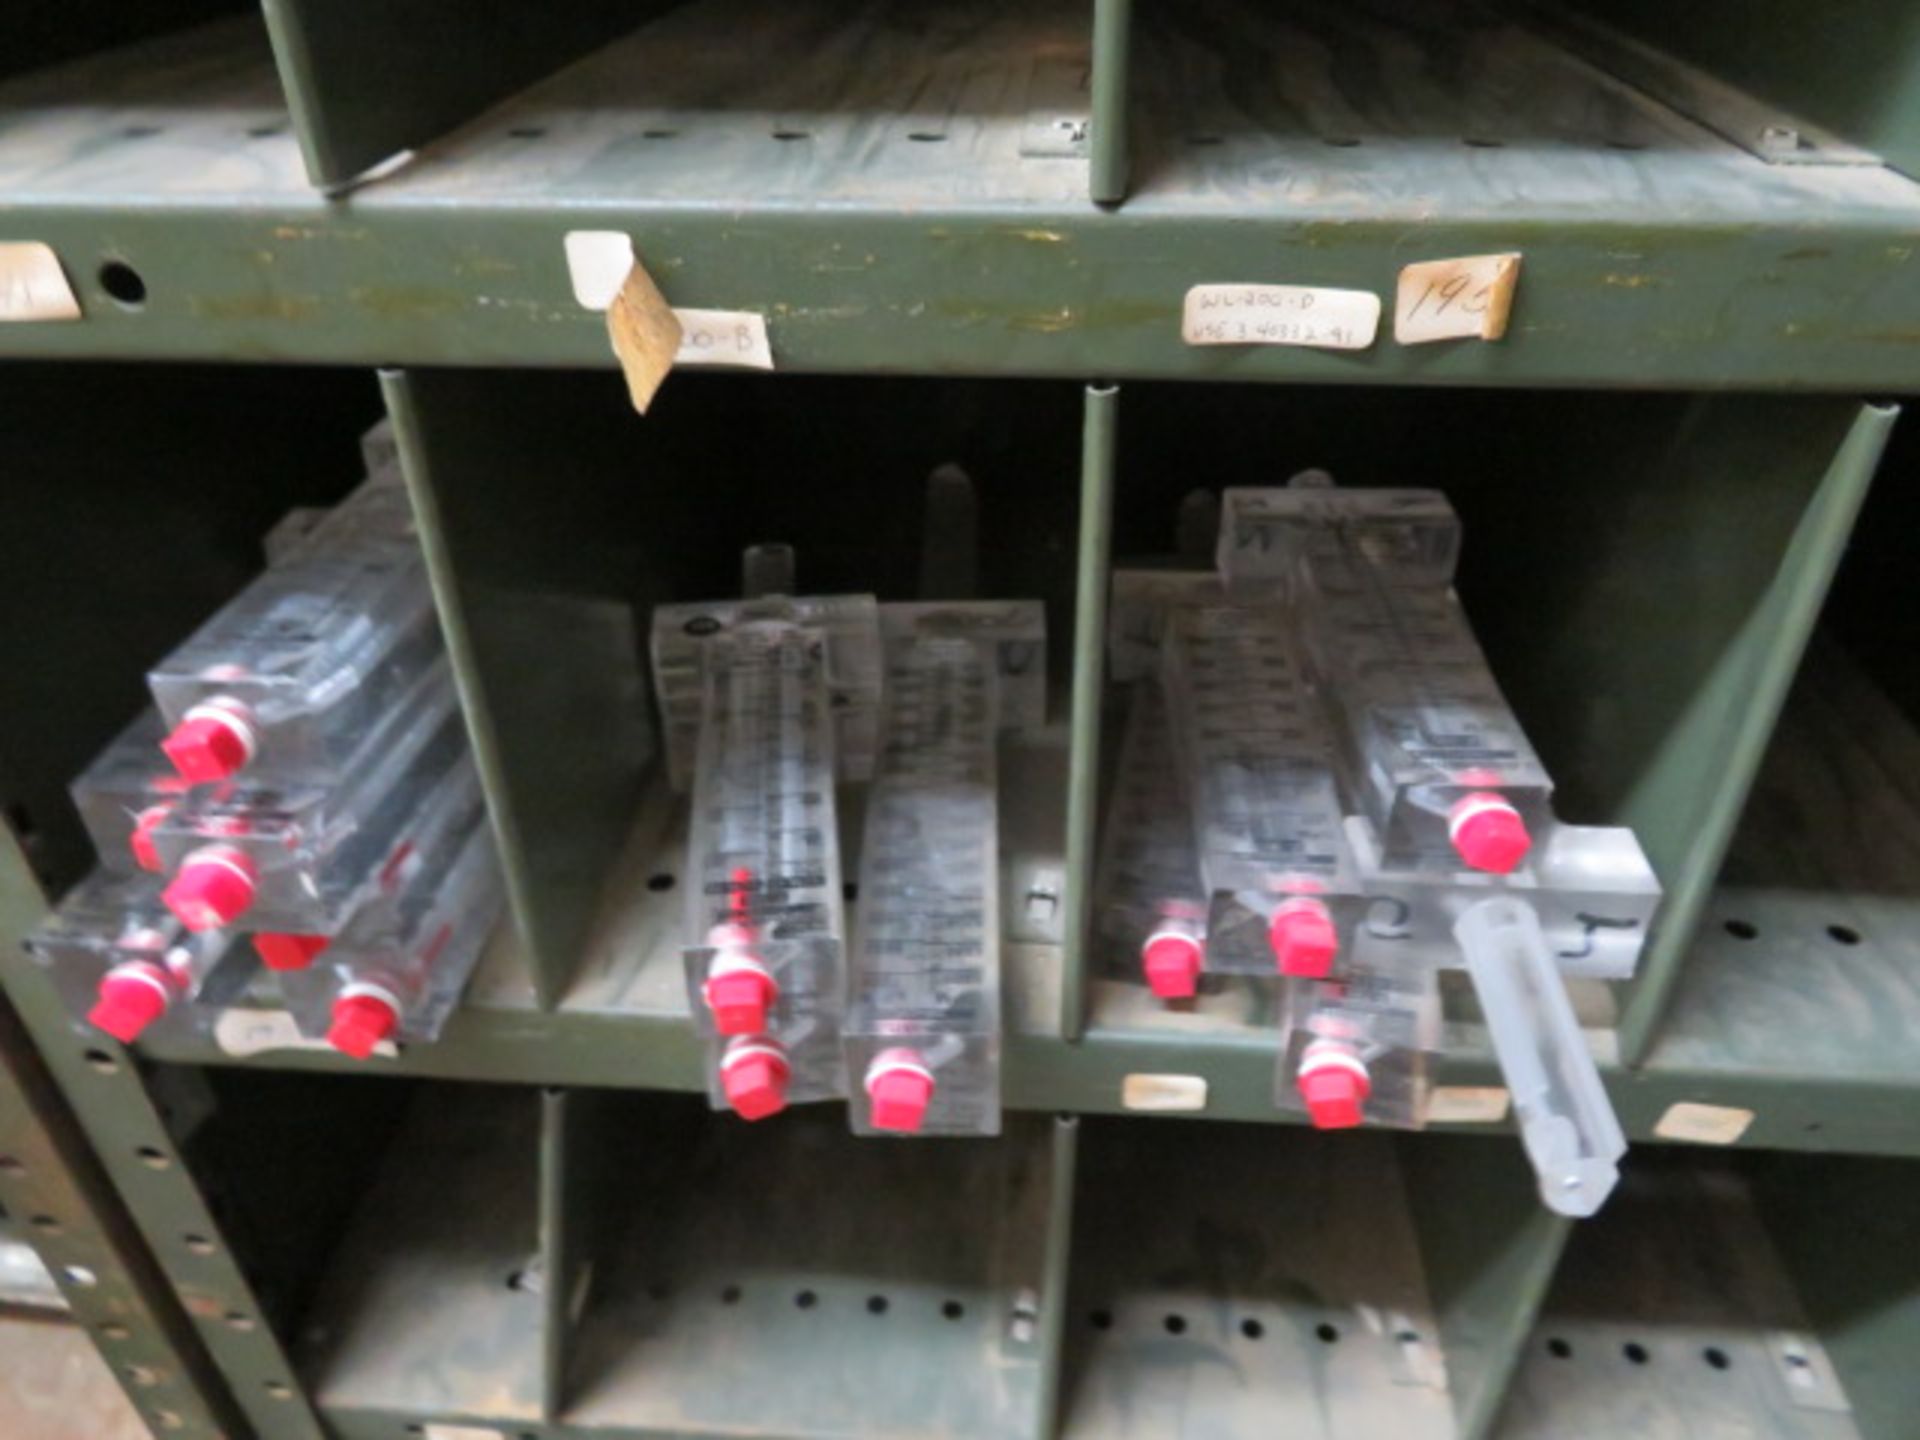 LOT CONSISTING OF: flow meters, pump seals, & depth markers, assorted - Image 4 of 5